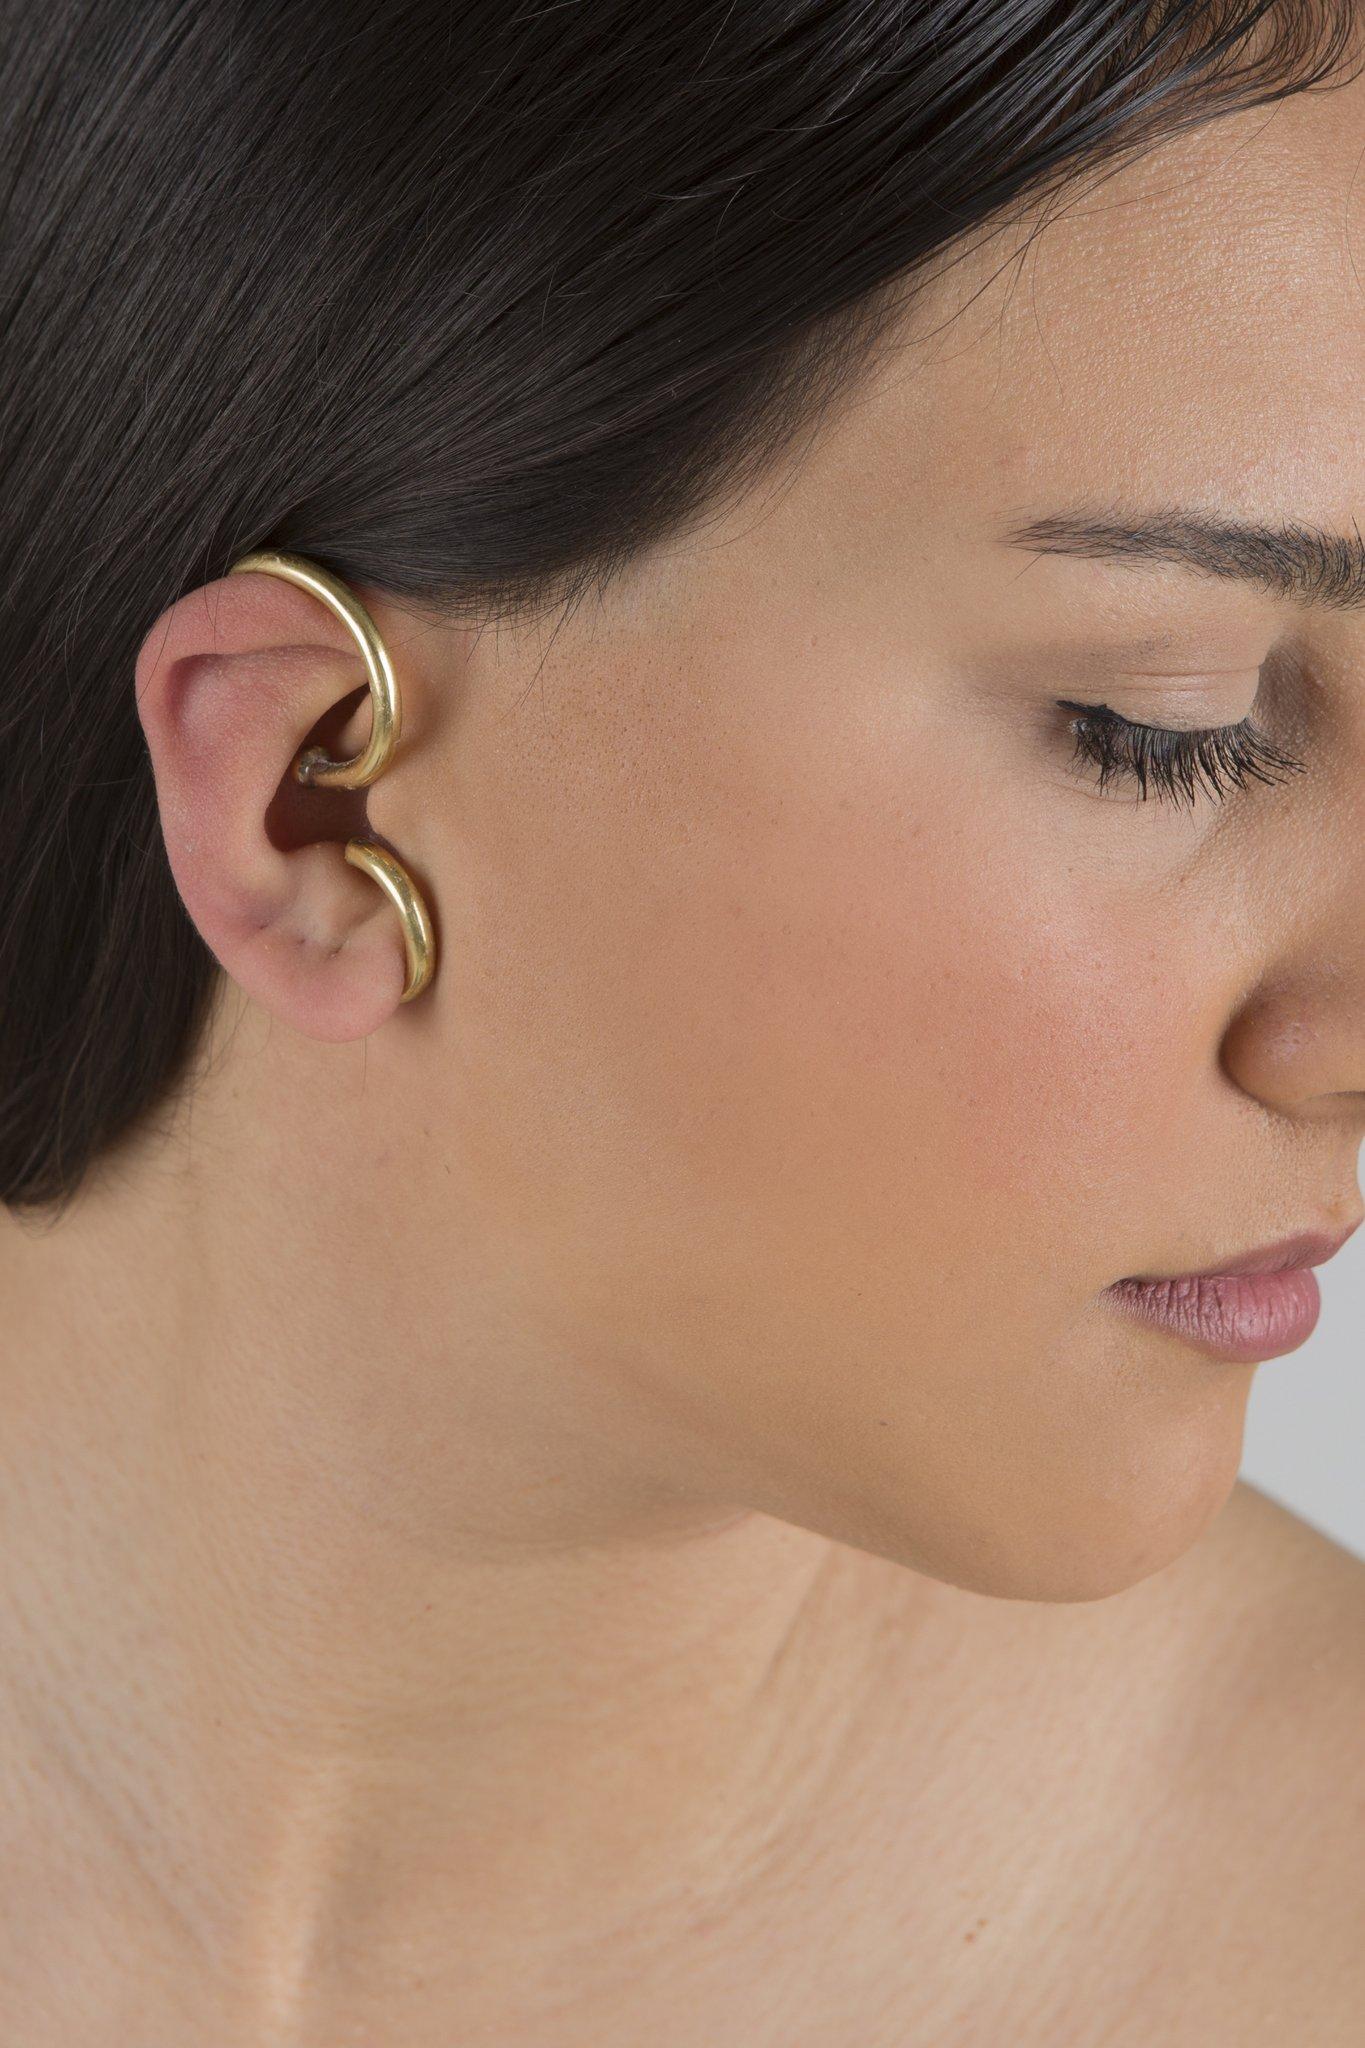 Playable, ergonomically designed ear cuff. The wire is flexible. User can adjust it by playing in hand.